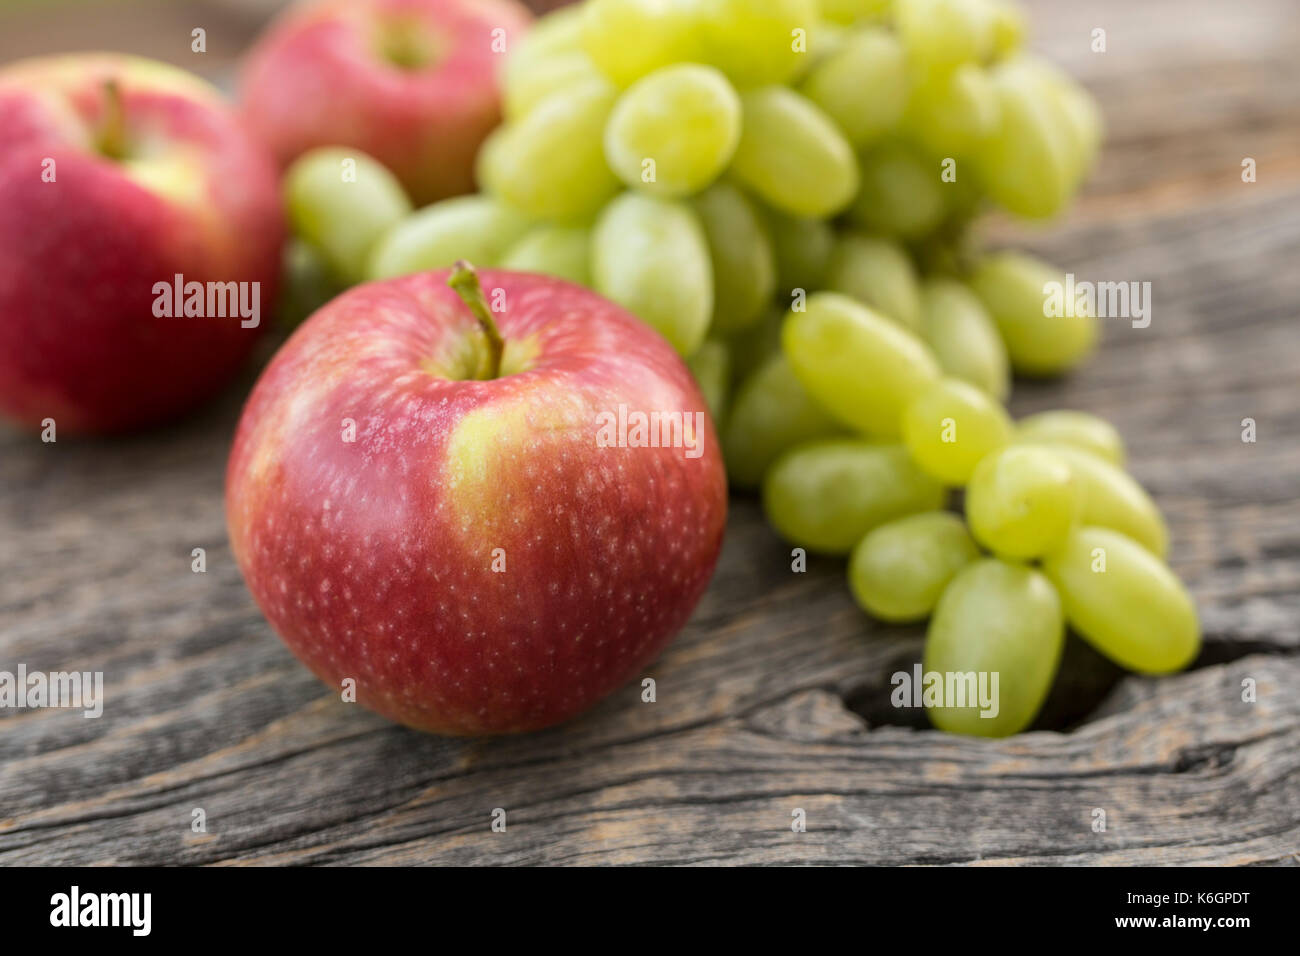 Season of apple picking and all kind of assessors are placed just for the occasion. Stock Photo